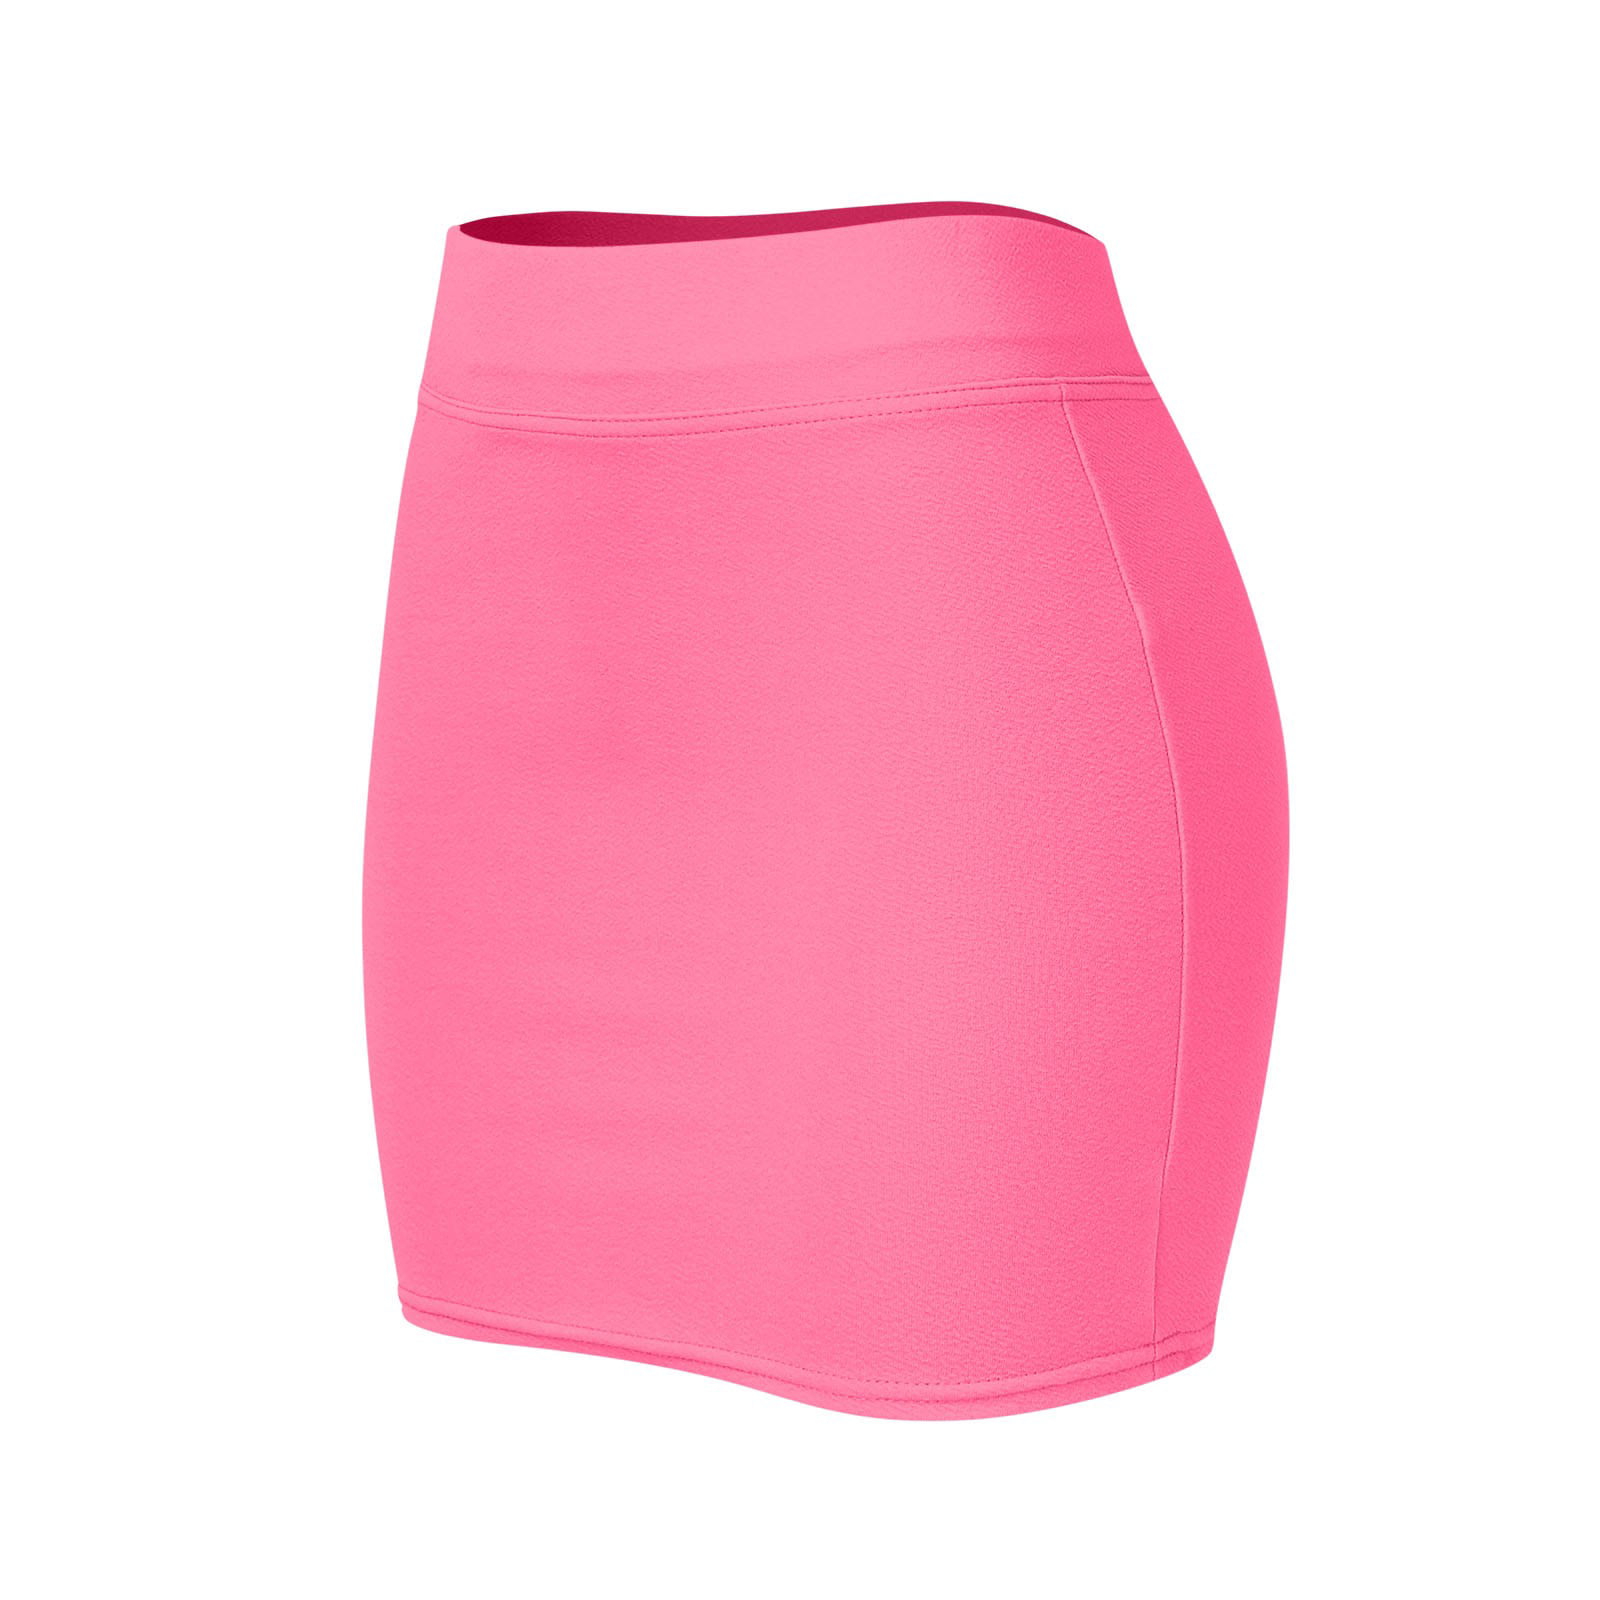 Hot Pink Pencil Skirt With Pockets 1980s Bright Pink High Waisted Above the  Knee Pencil Skirt Secretary Skirt With Pockets Size Small -  Canada